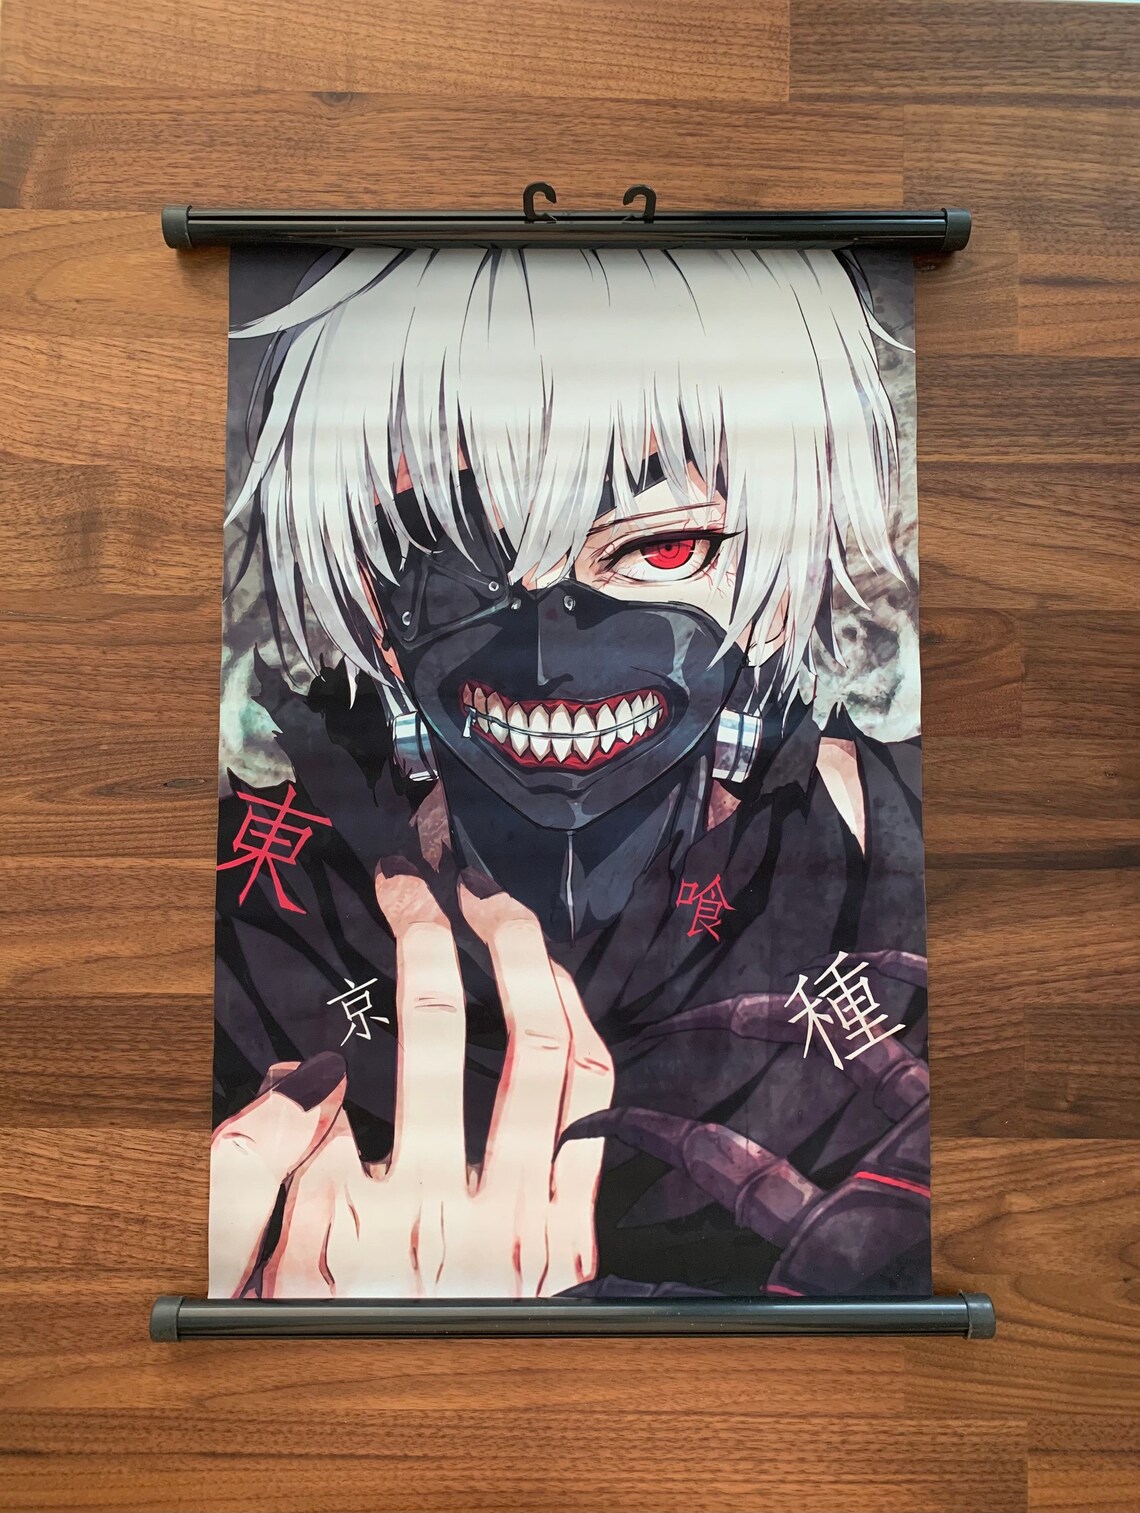 Tokyo Ghoul Wall Scroll Anime Wall Hanging Print Poster image 1